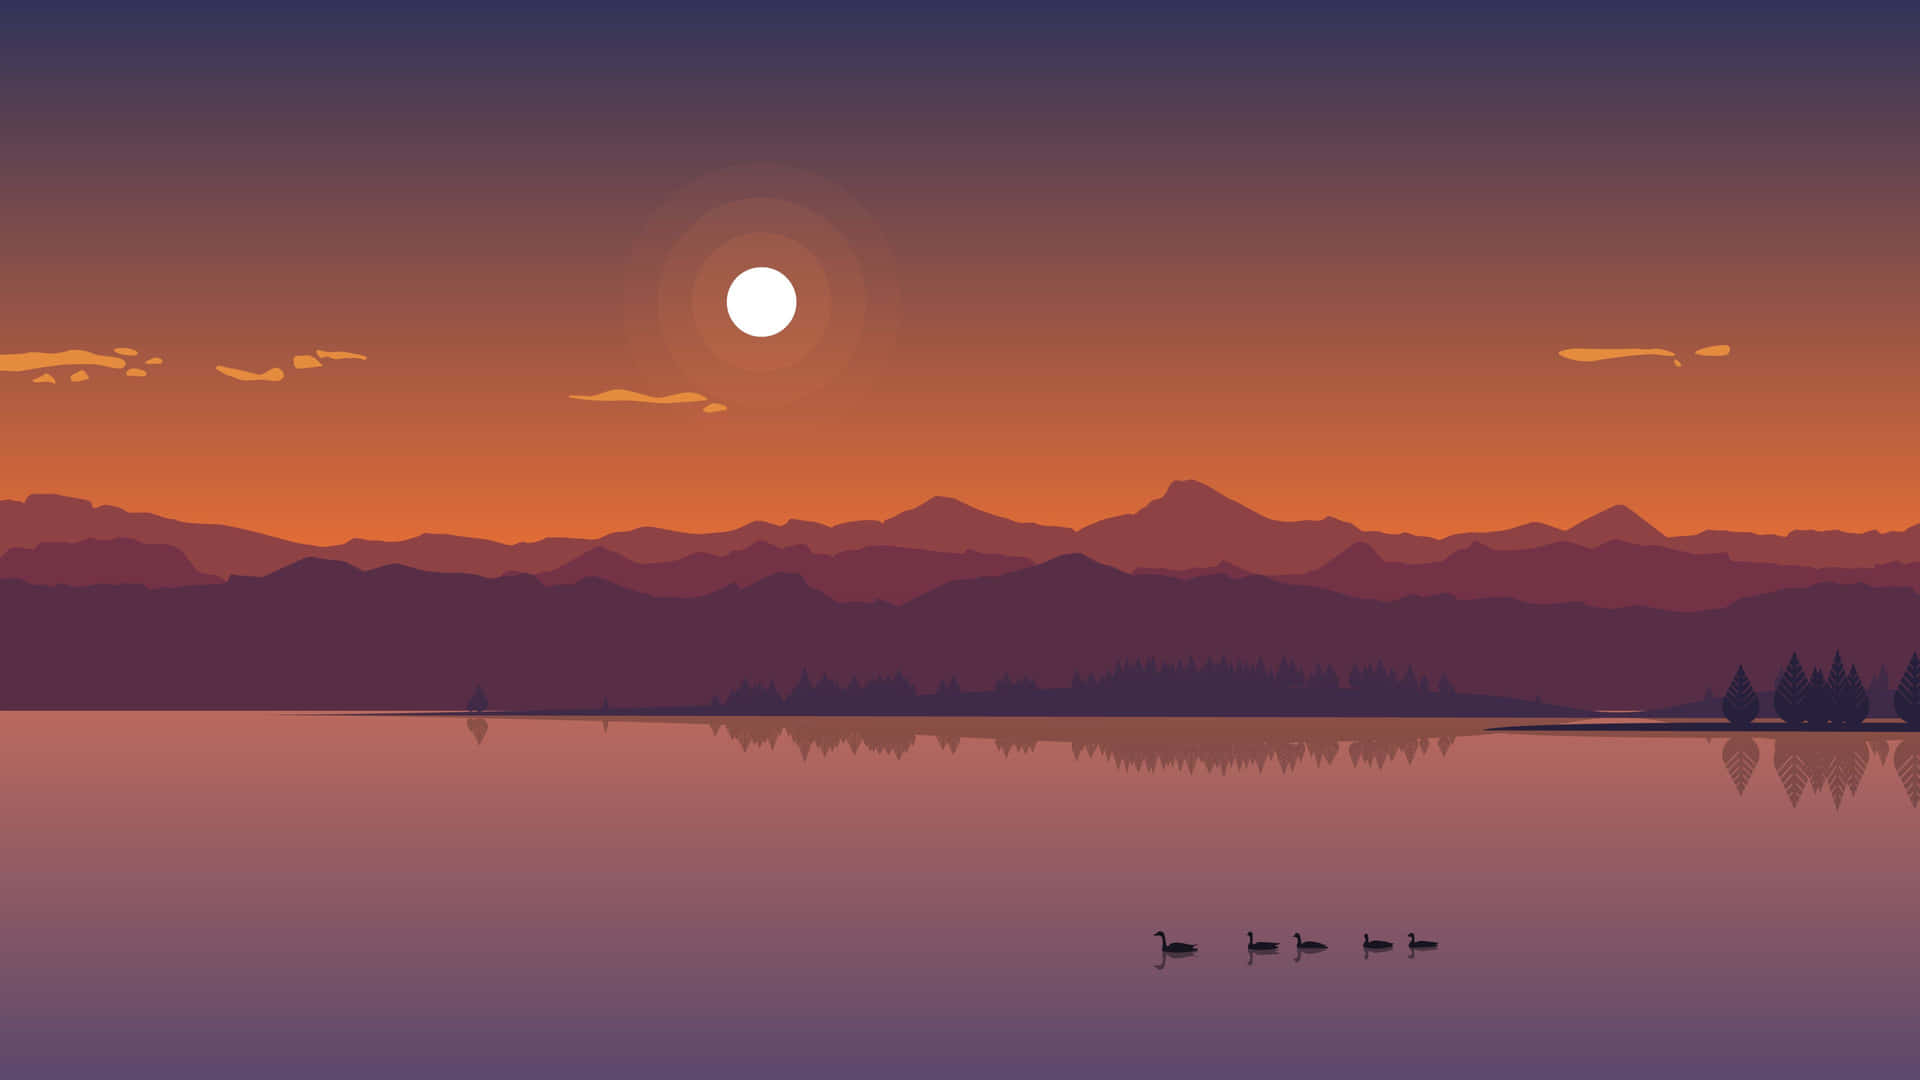 A Majestic Sunset Painting Wallpaper